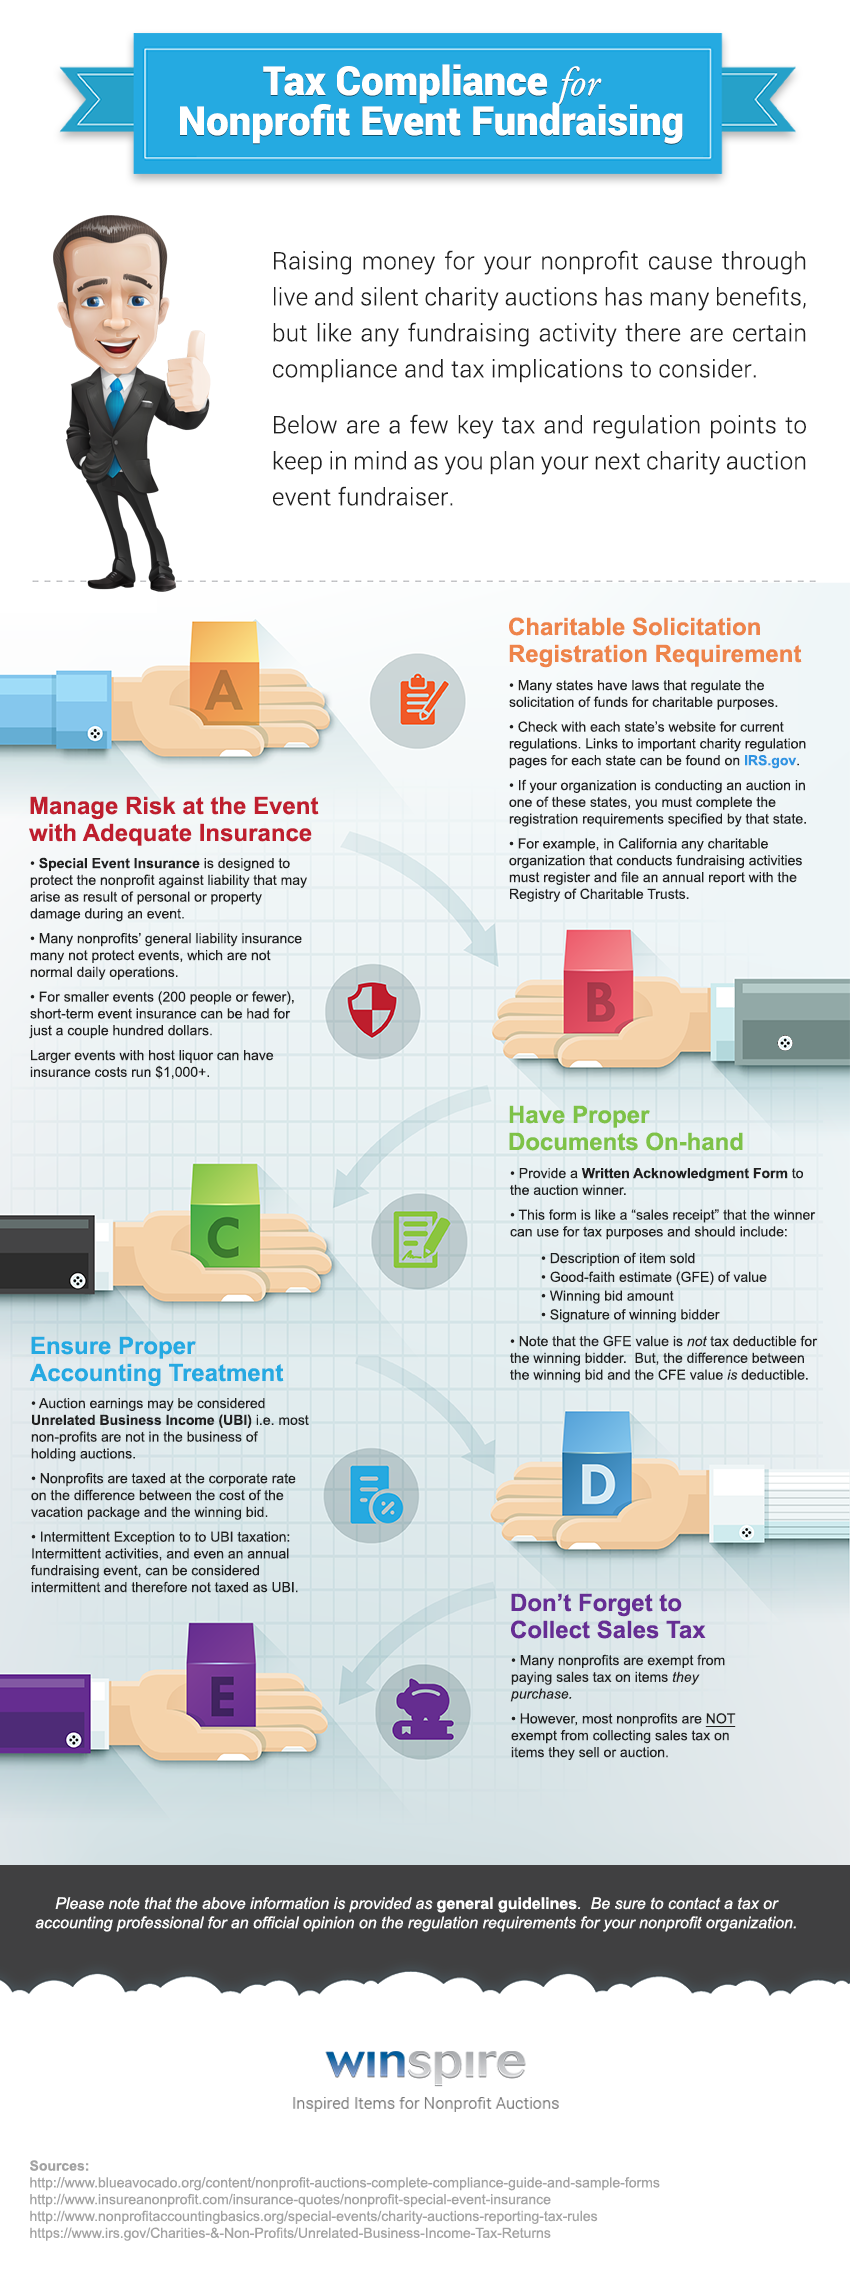 winspire-compliance-infographic-1.png